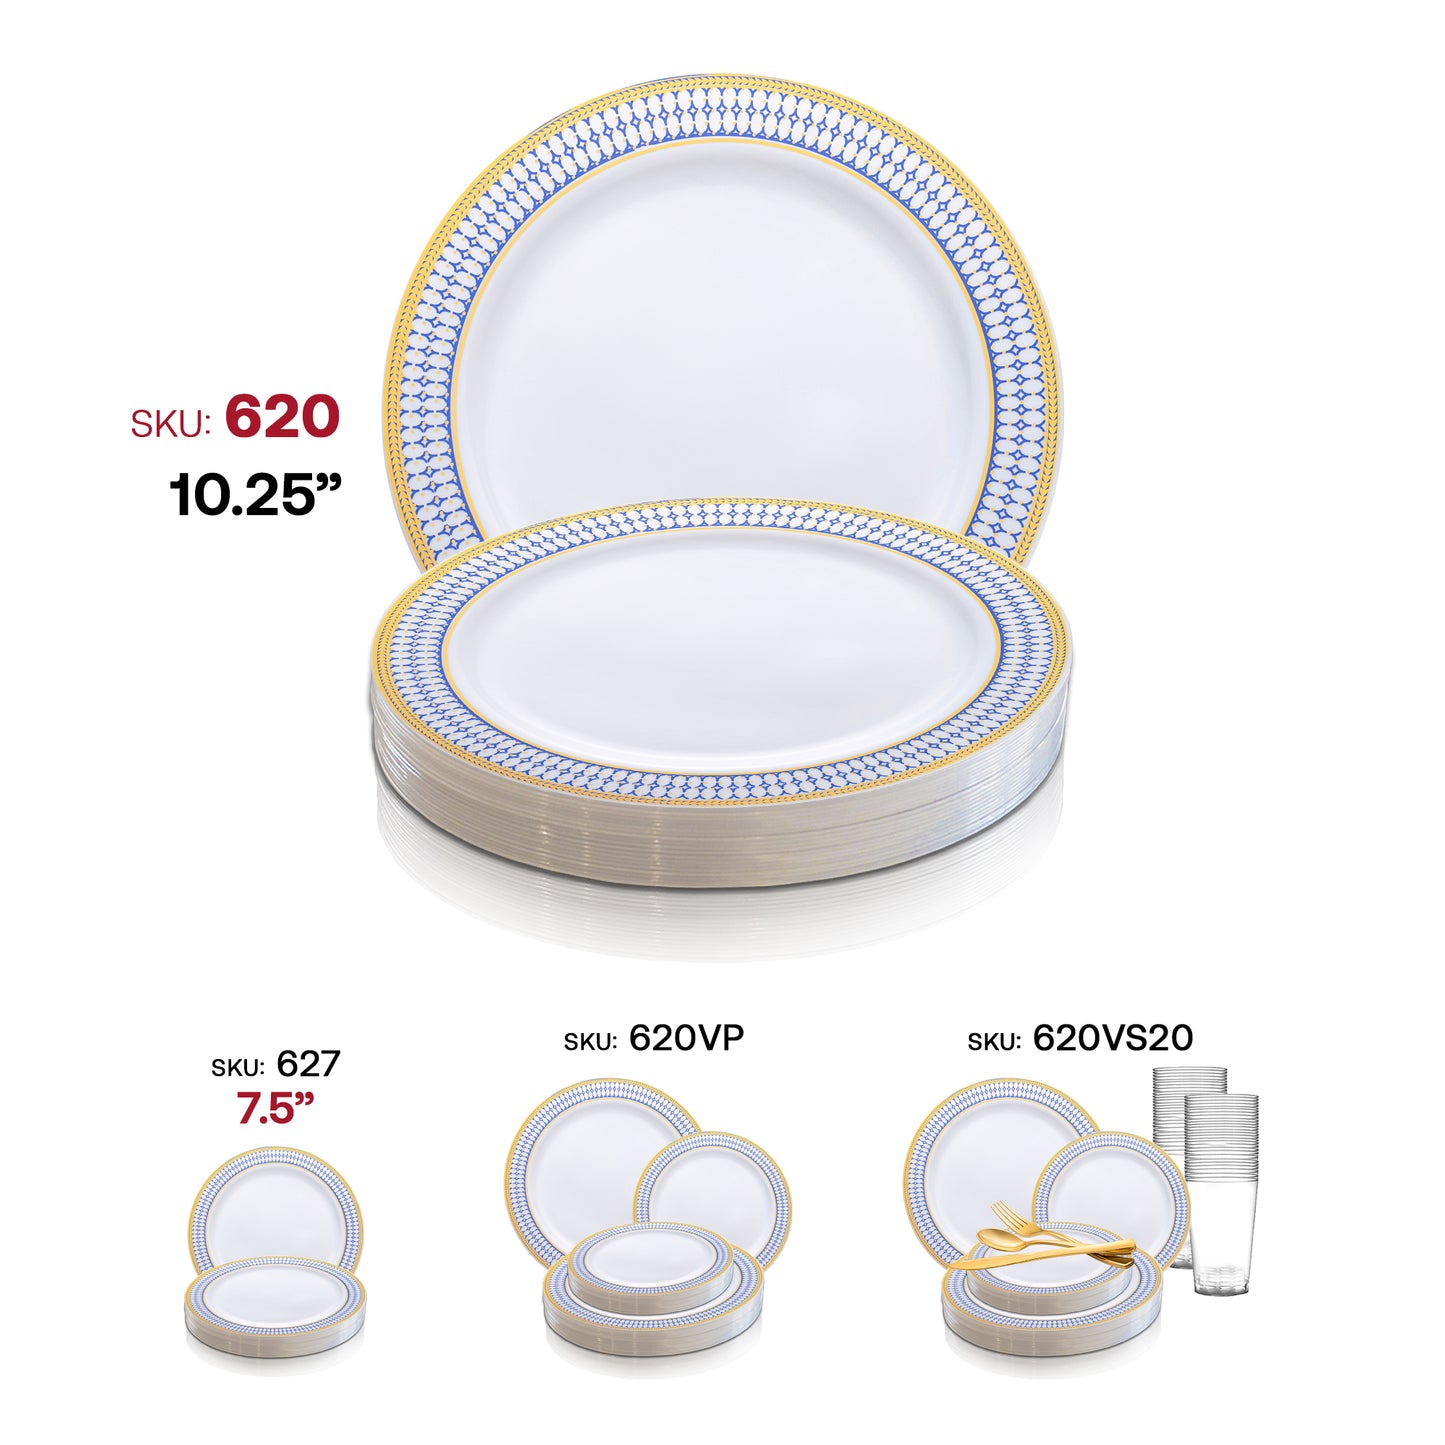 White with Blue and Gold Chord Rim Plastic Dinner Plates (10.25") SKU | The Kaya Collection